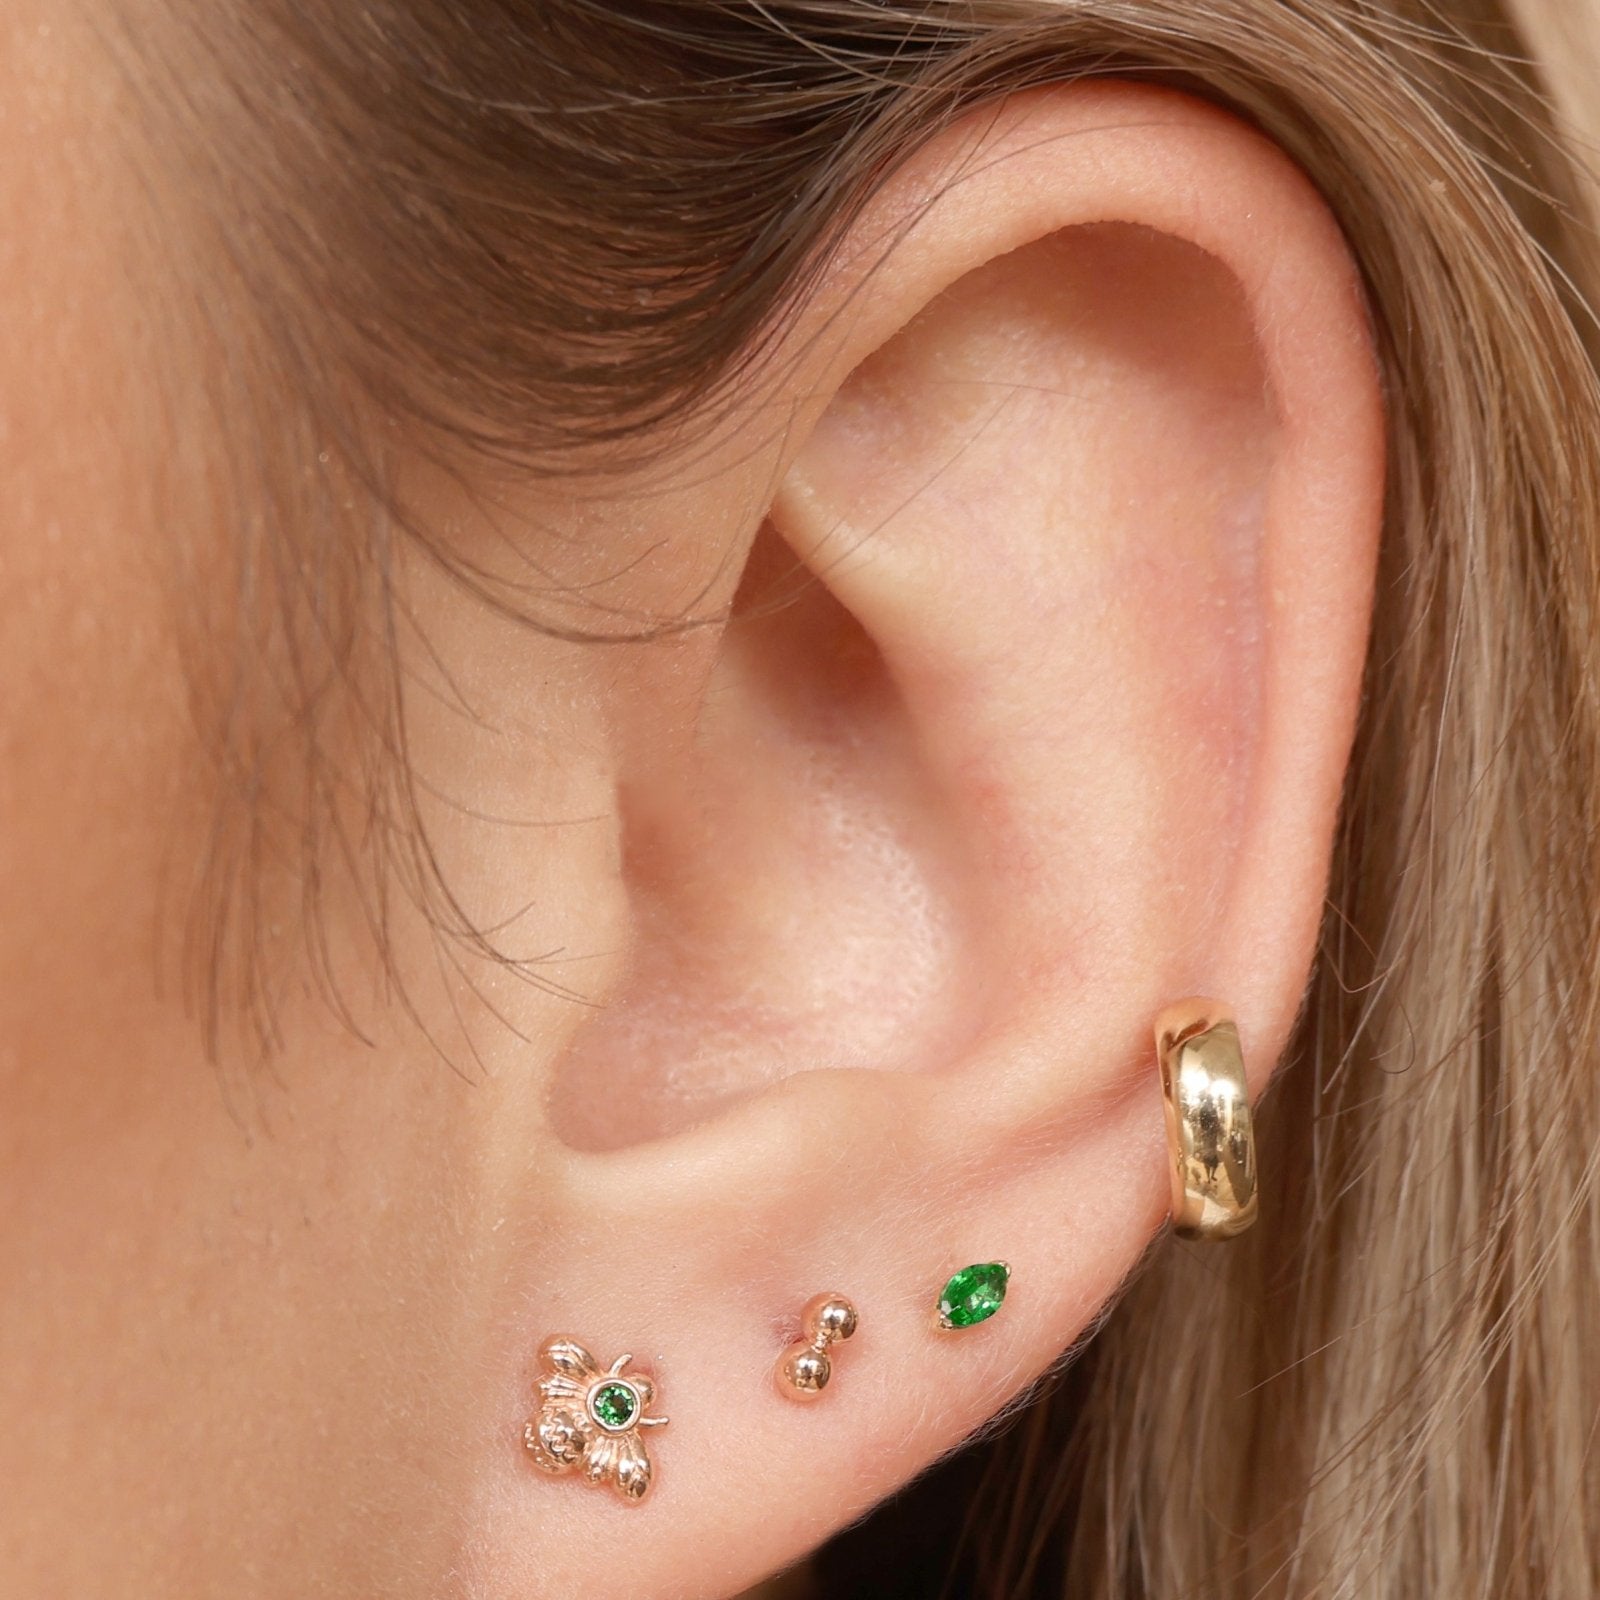 Marquise Emerald Flat Back Earring Earrings Estella Collection #product_description# 18499 14k Birthstone Birthstone Earrings #tag4# #tag5# #tag6# #tag7# #tag8# #tag9# #tag10# 5MM